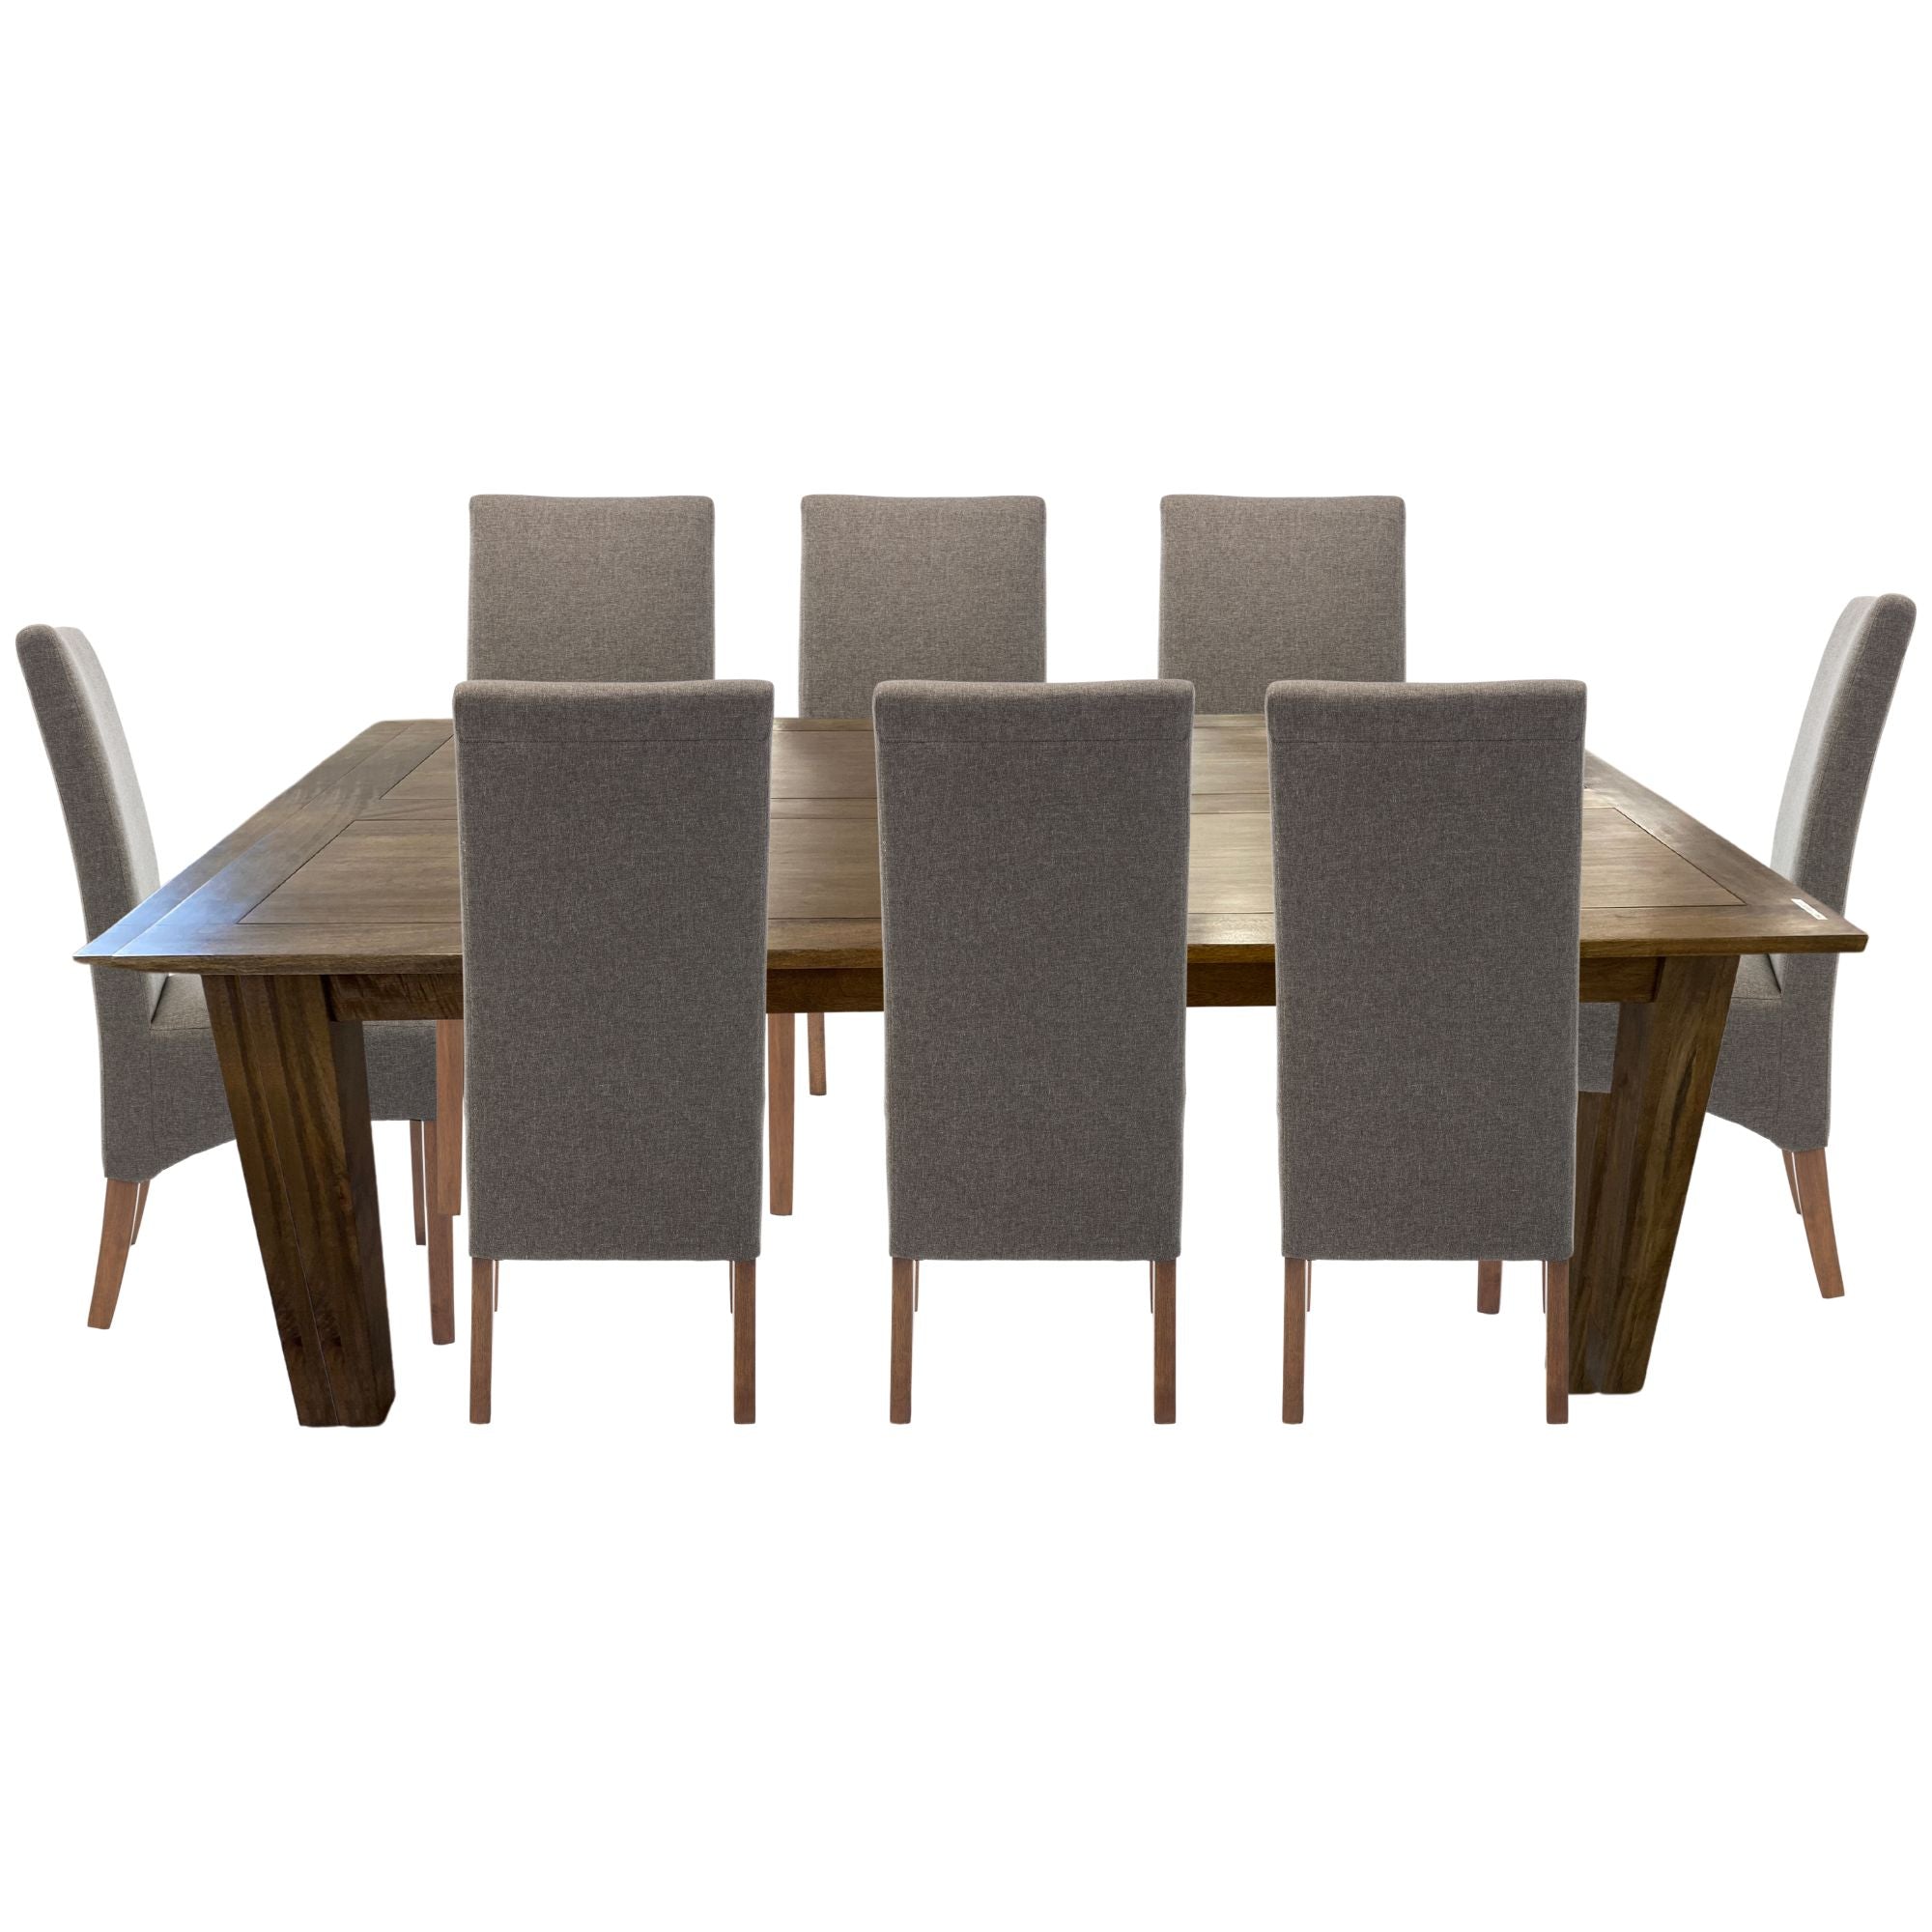 Aksa Fabric Upholstered Dining Chair Set of 4 Solid Pine Wood Furniture - Grey